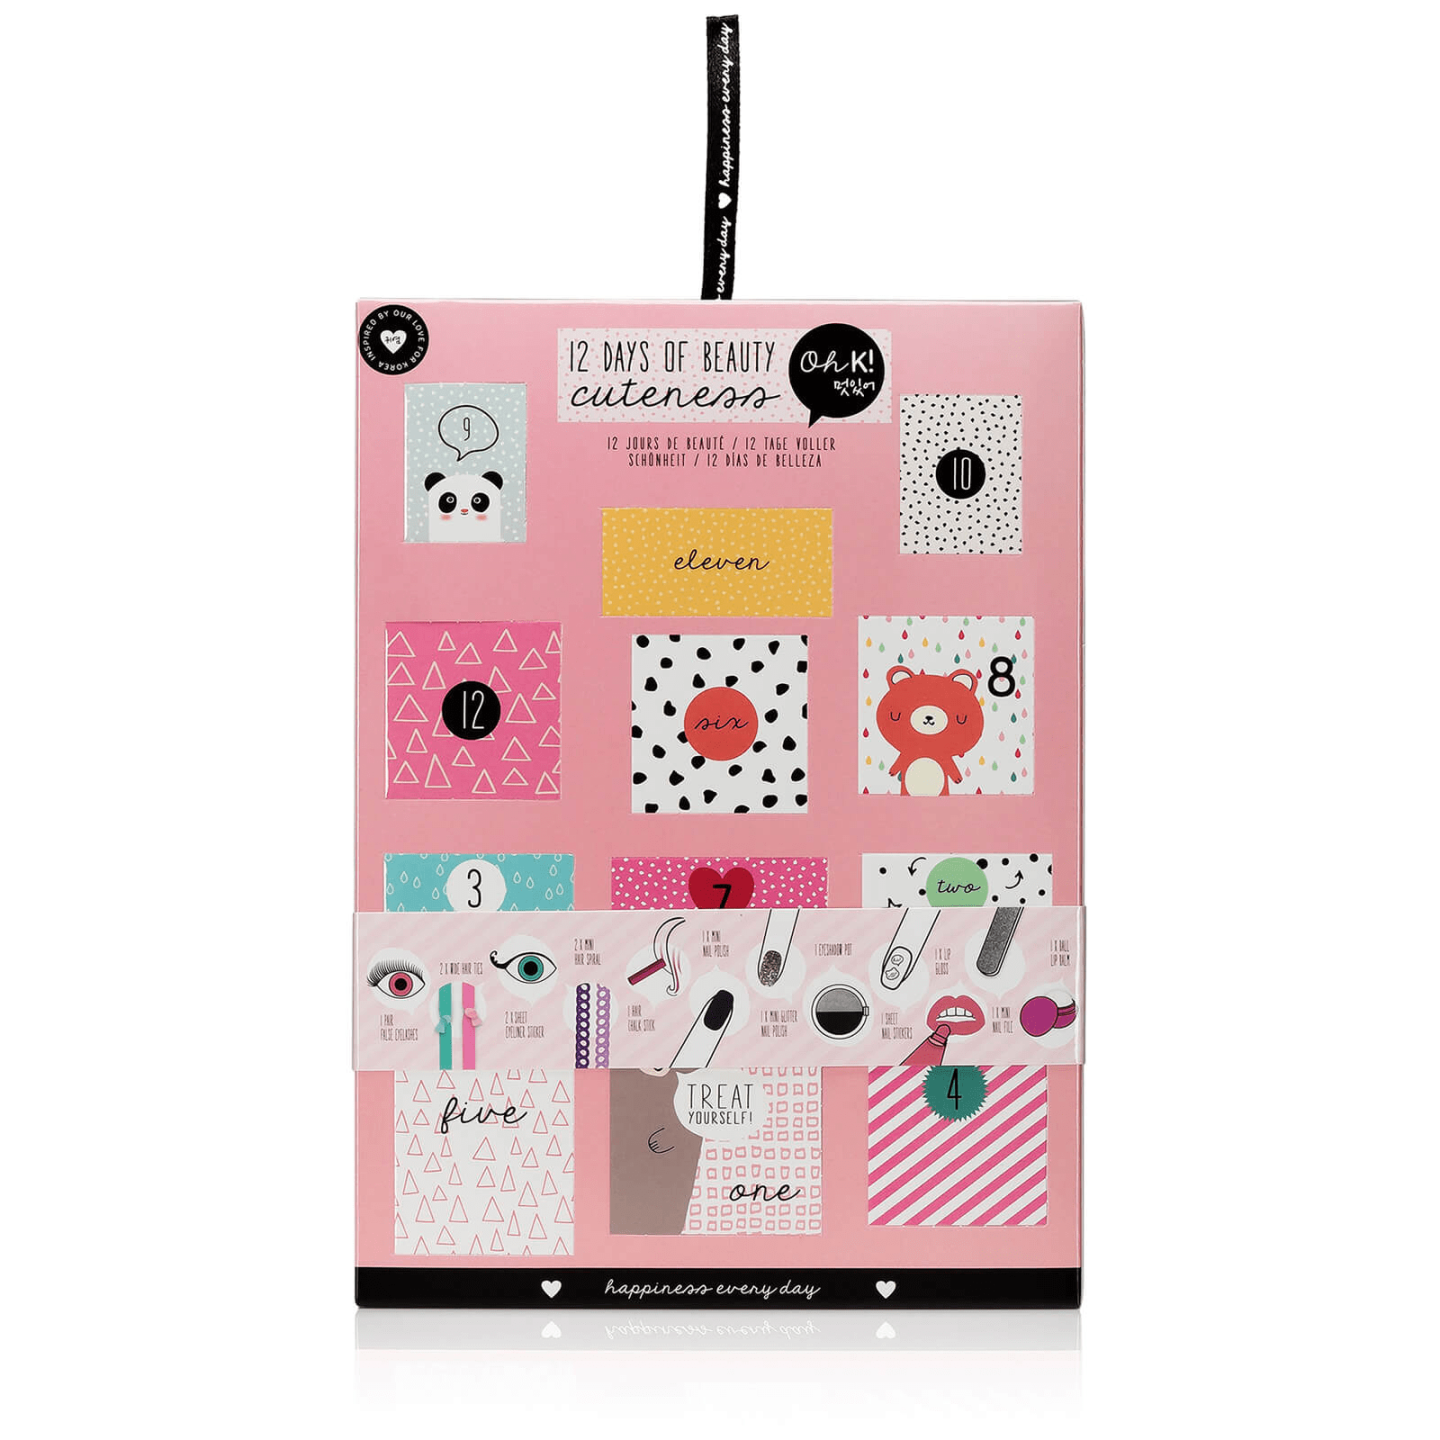 NPW OH K Beauty Advent Calendar 2018 Available Now   Spoilers Hello